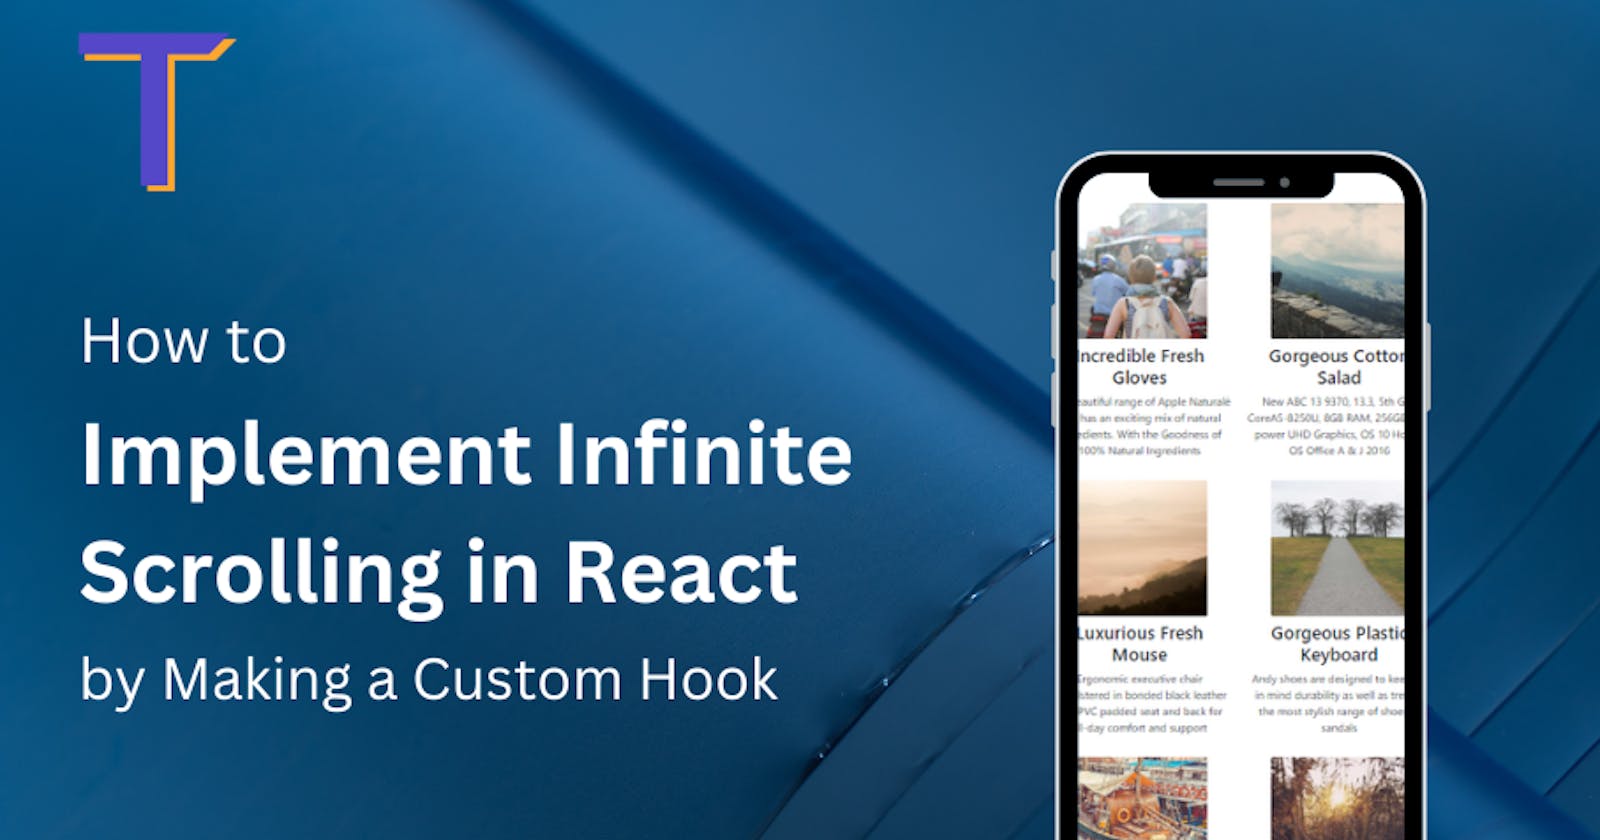 How to Implement Infinite Scrolling in React  by Making a Custom Hook